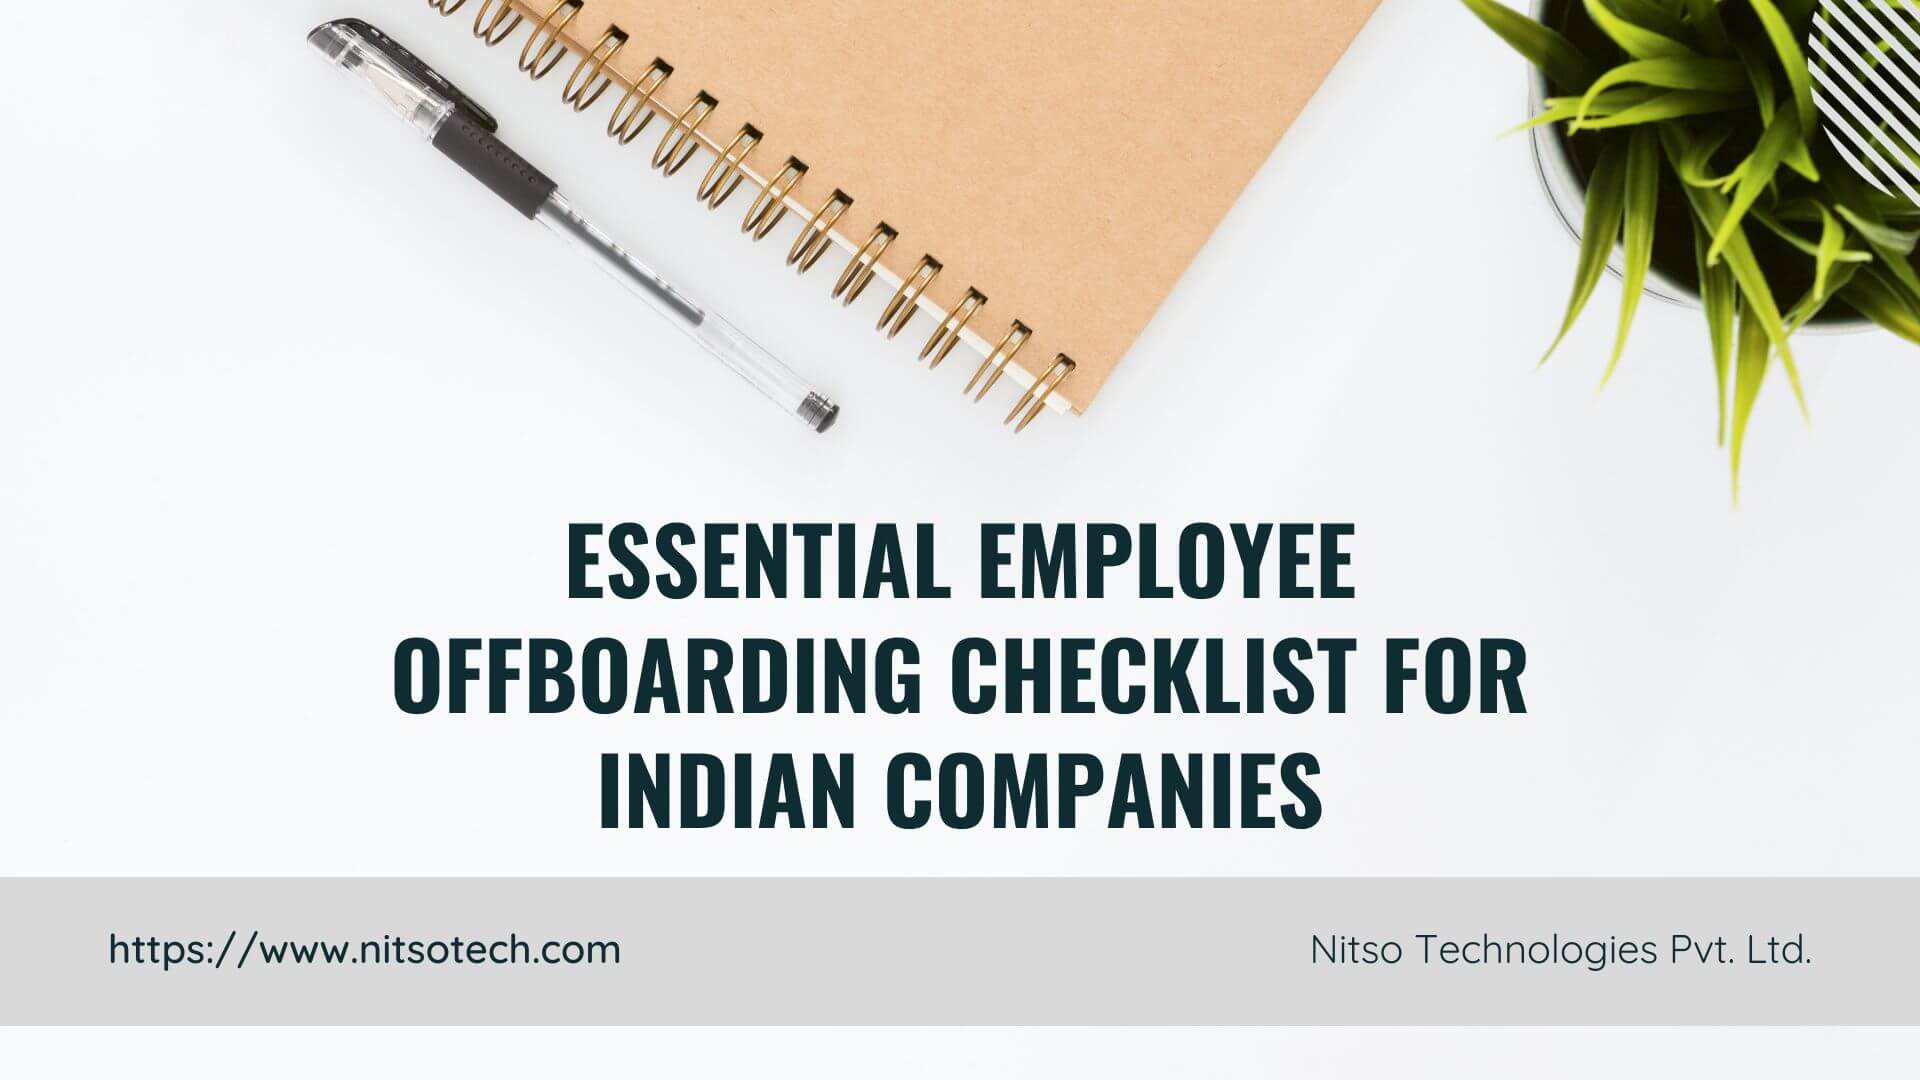 The Essential Employee Offboarding Checklist for Indian Companies